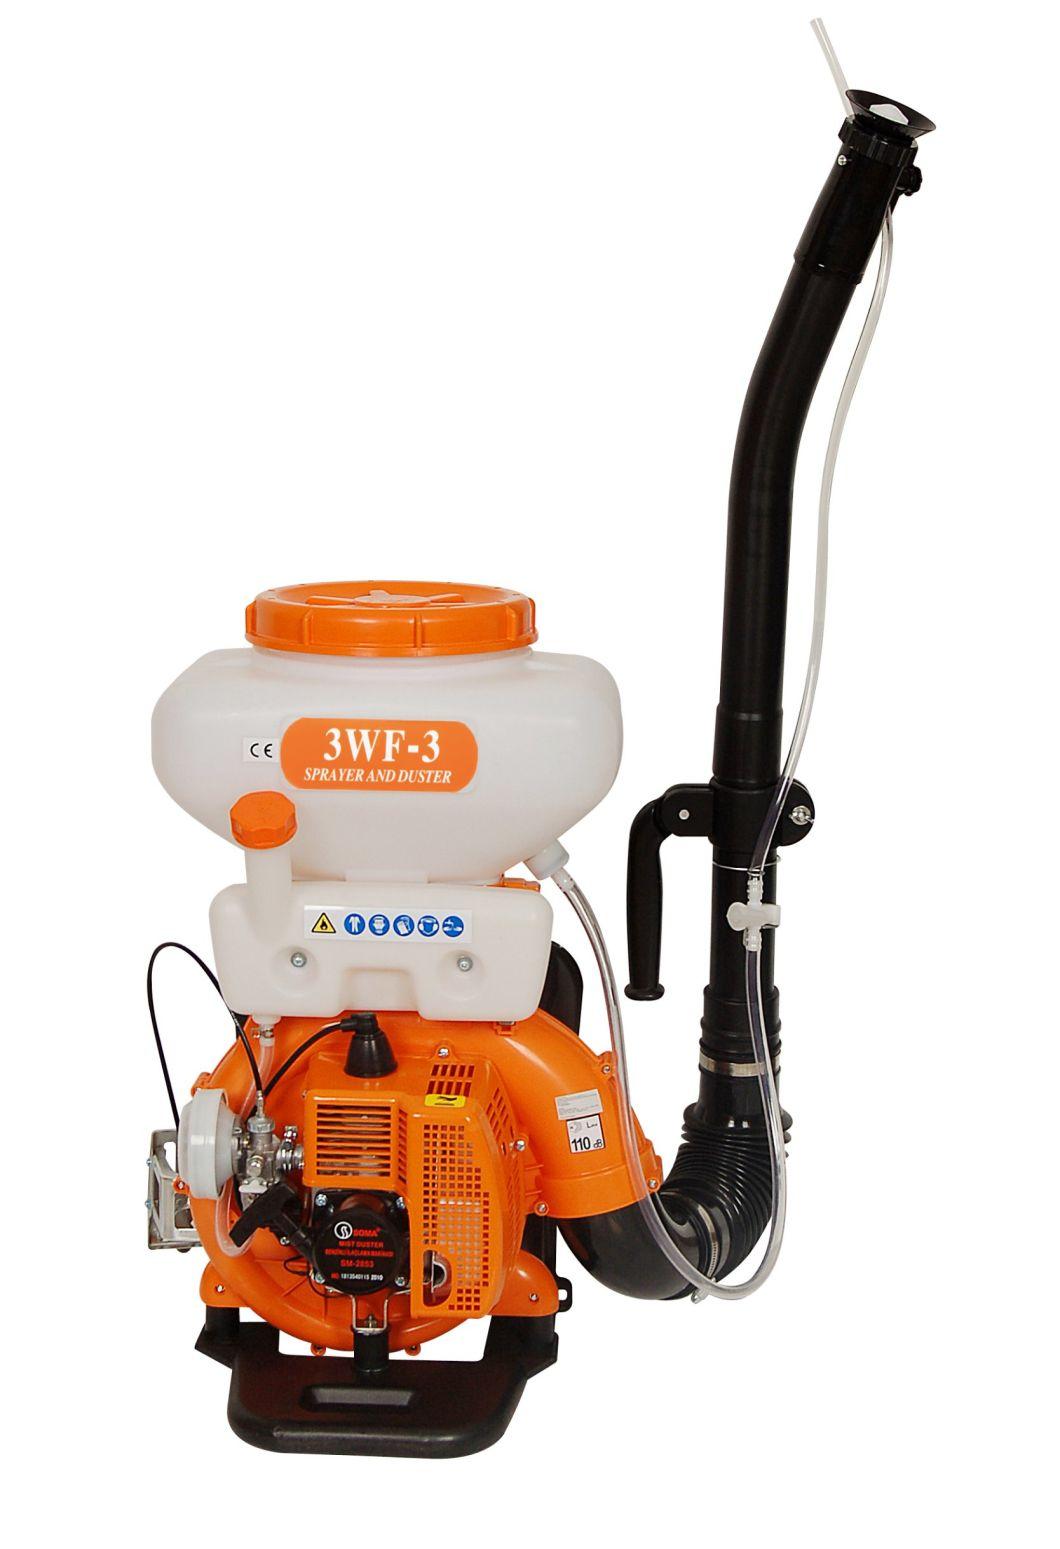 Mist Duster 3wf-3 with 2-Stroke 3 HP